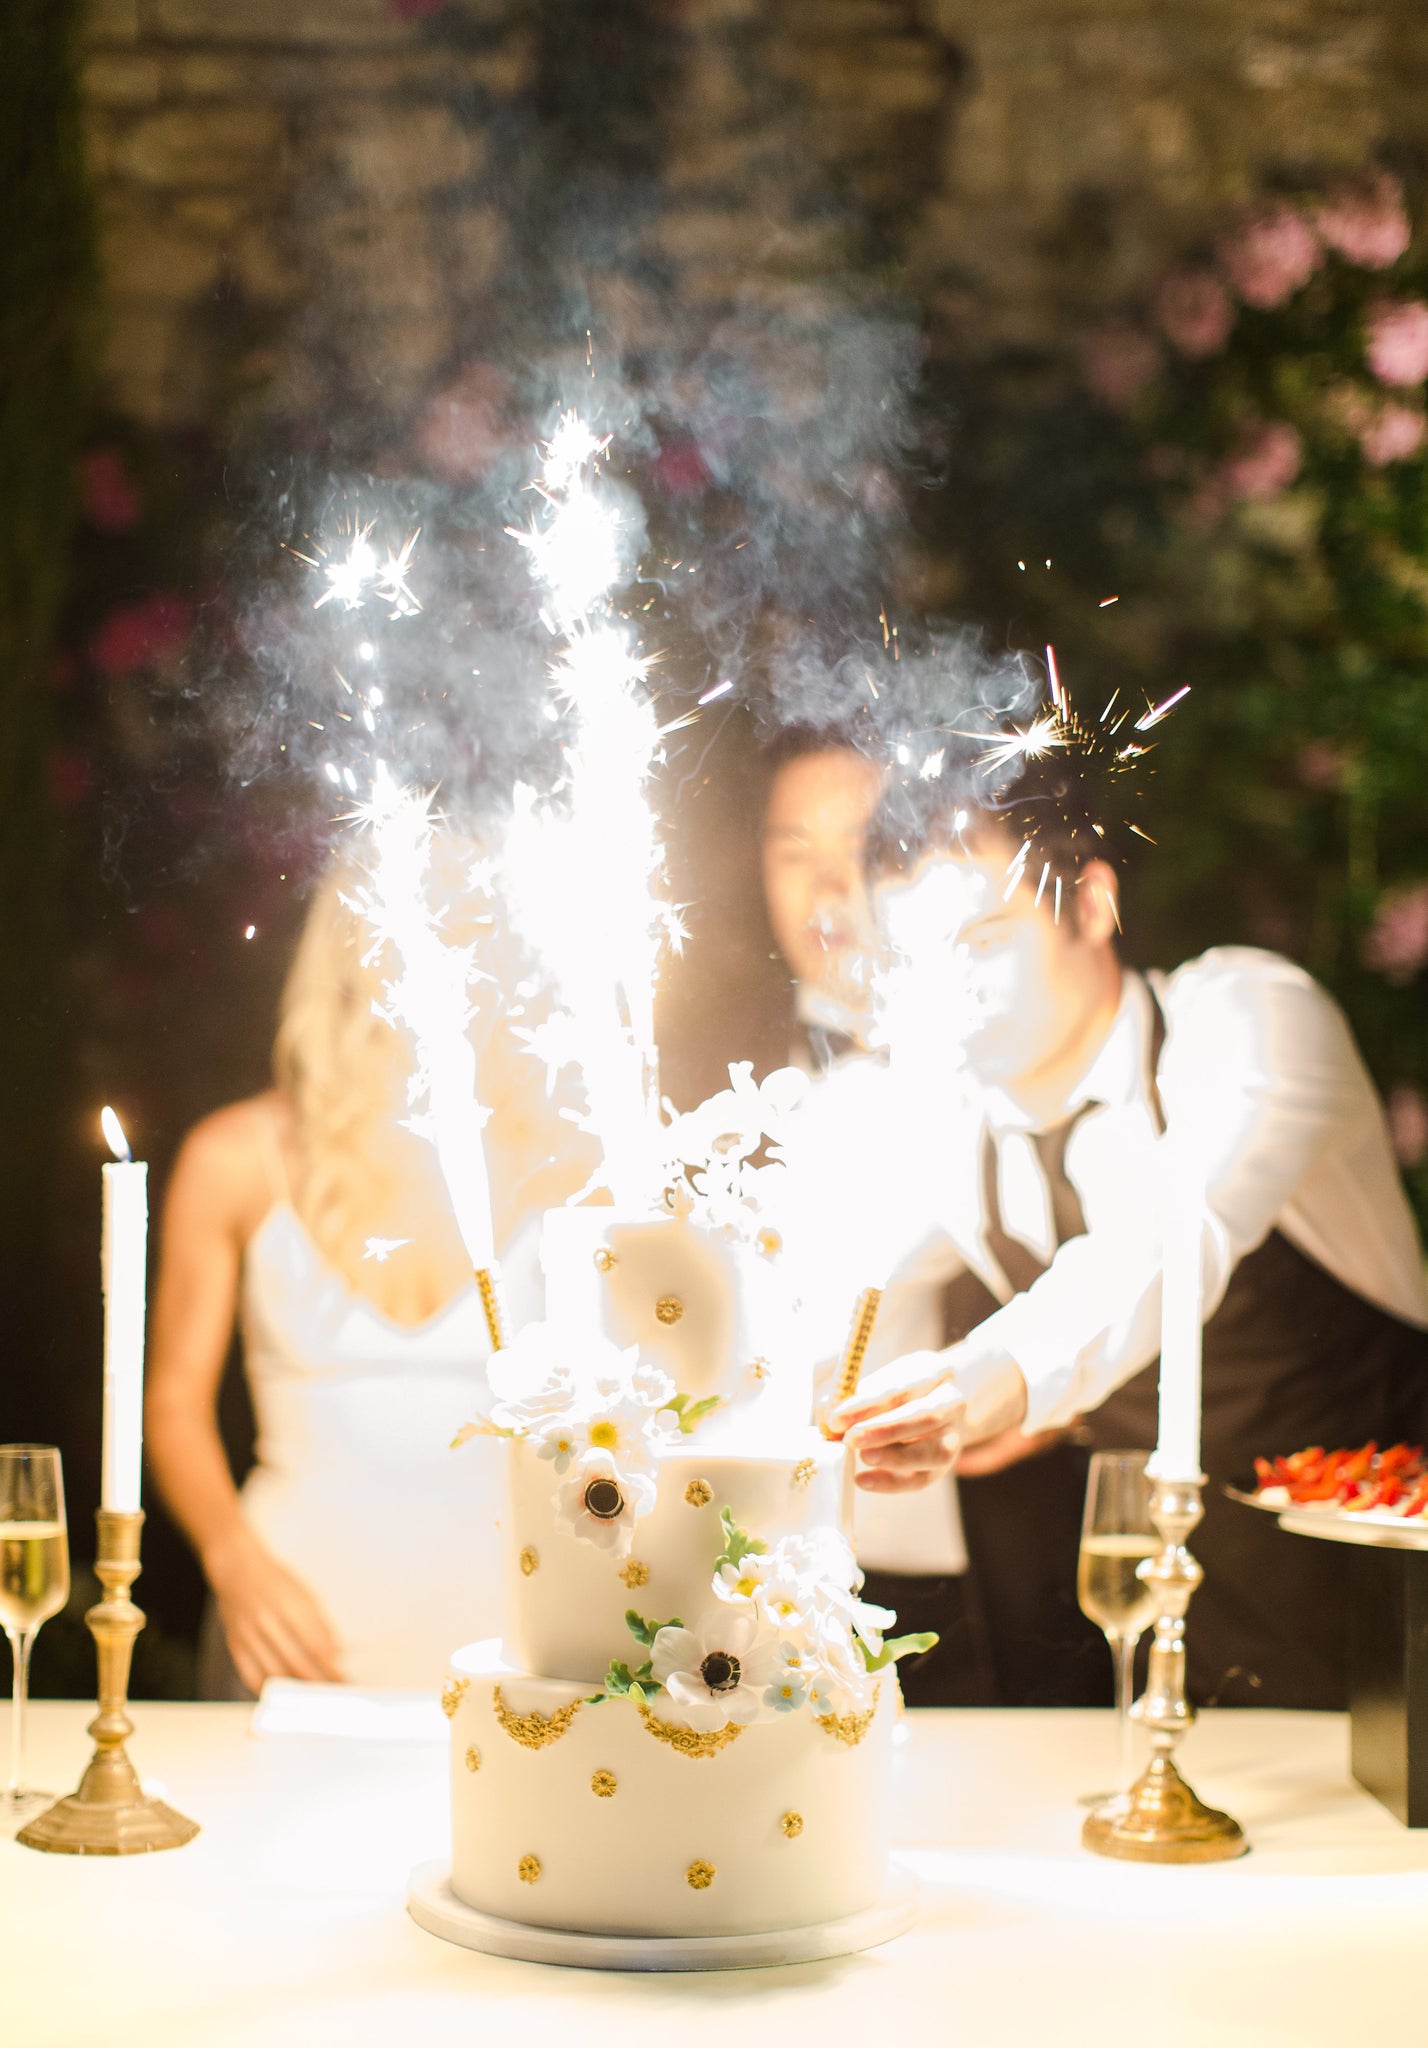 Katie Dean Jewelry romantic destination wedding at a chateau, Provence, France, cake sparklers